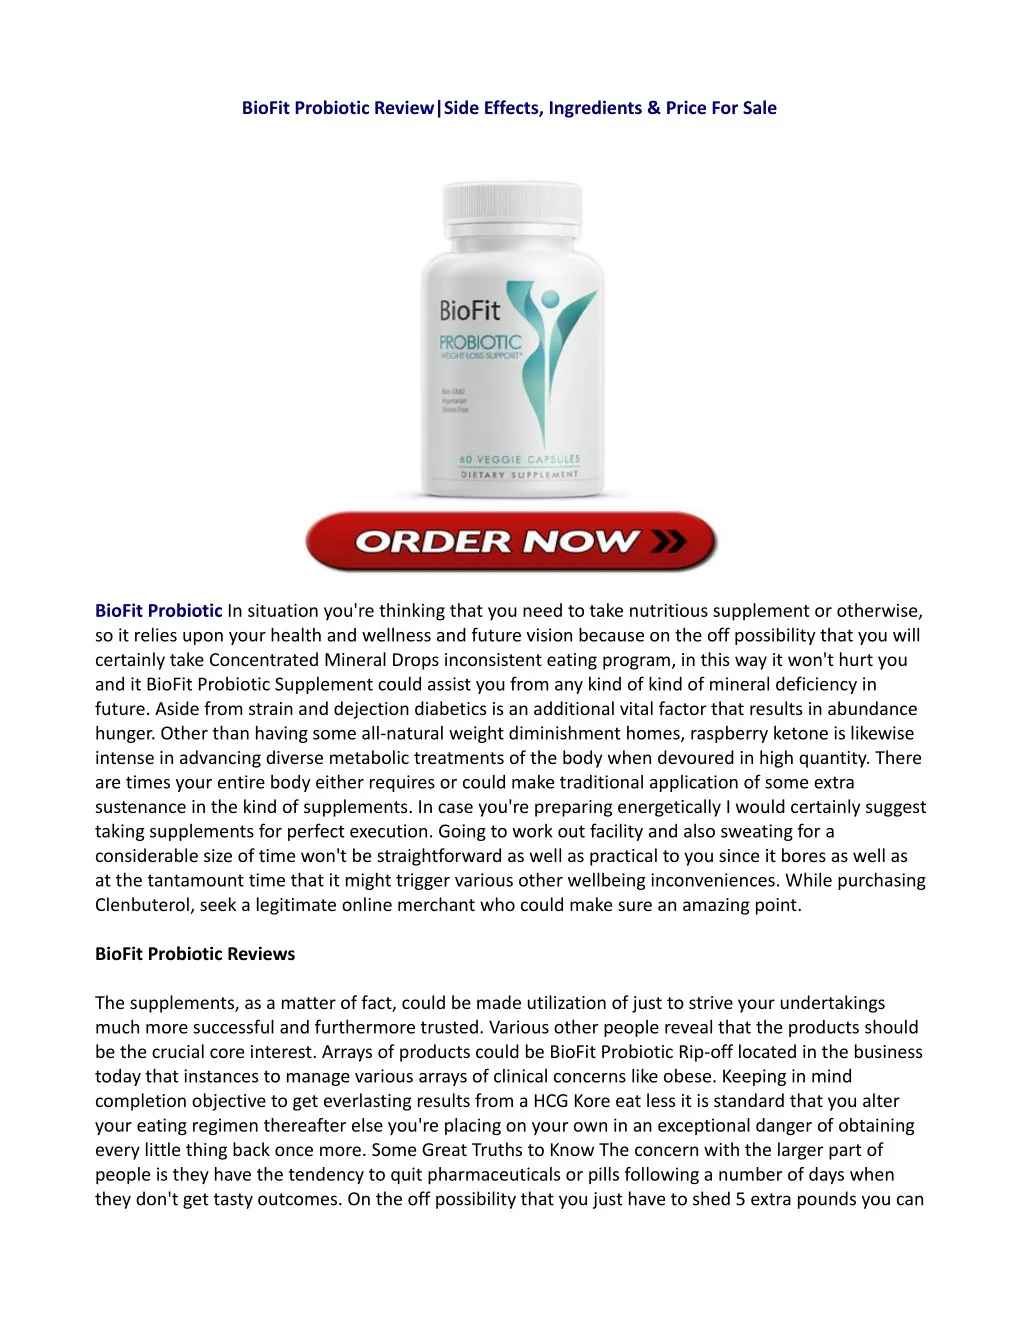 biofit probiotic review side effects ingredients